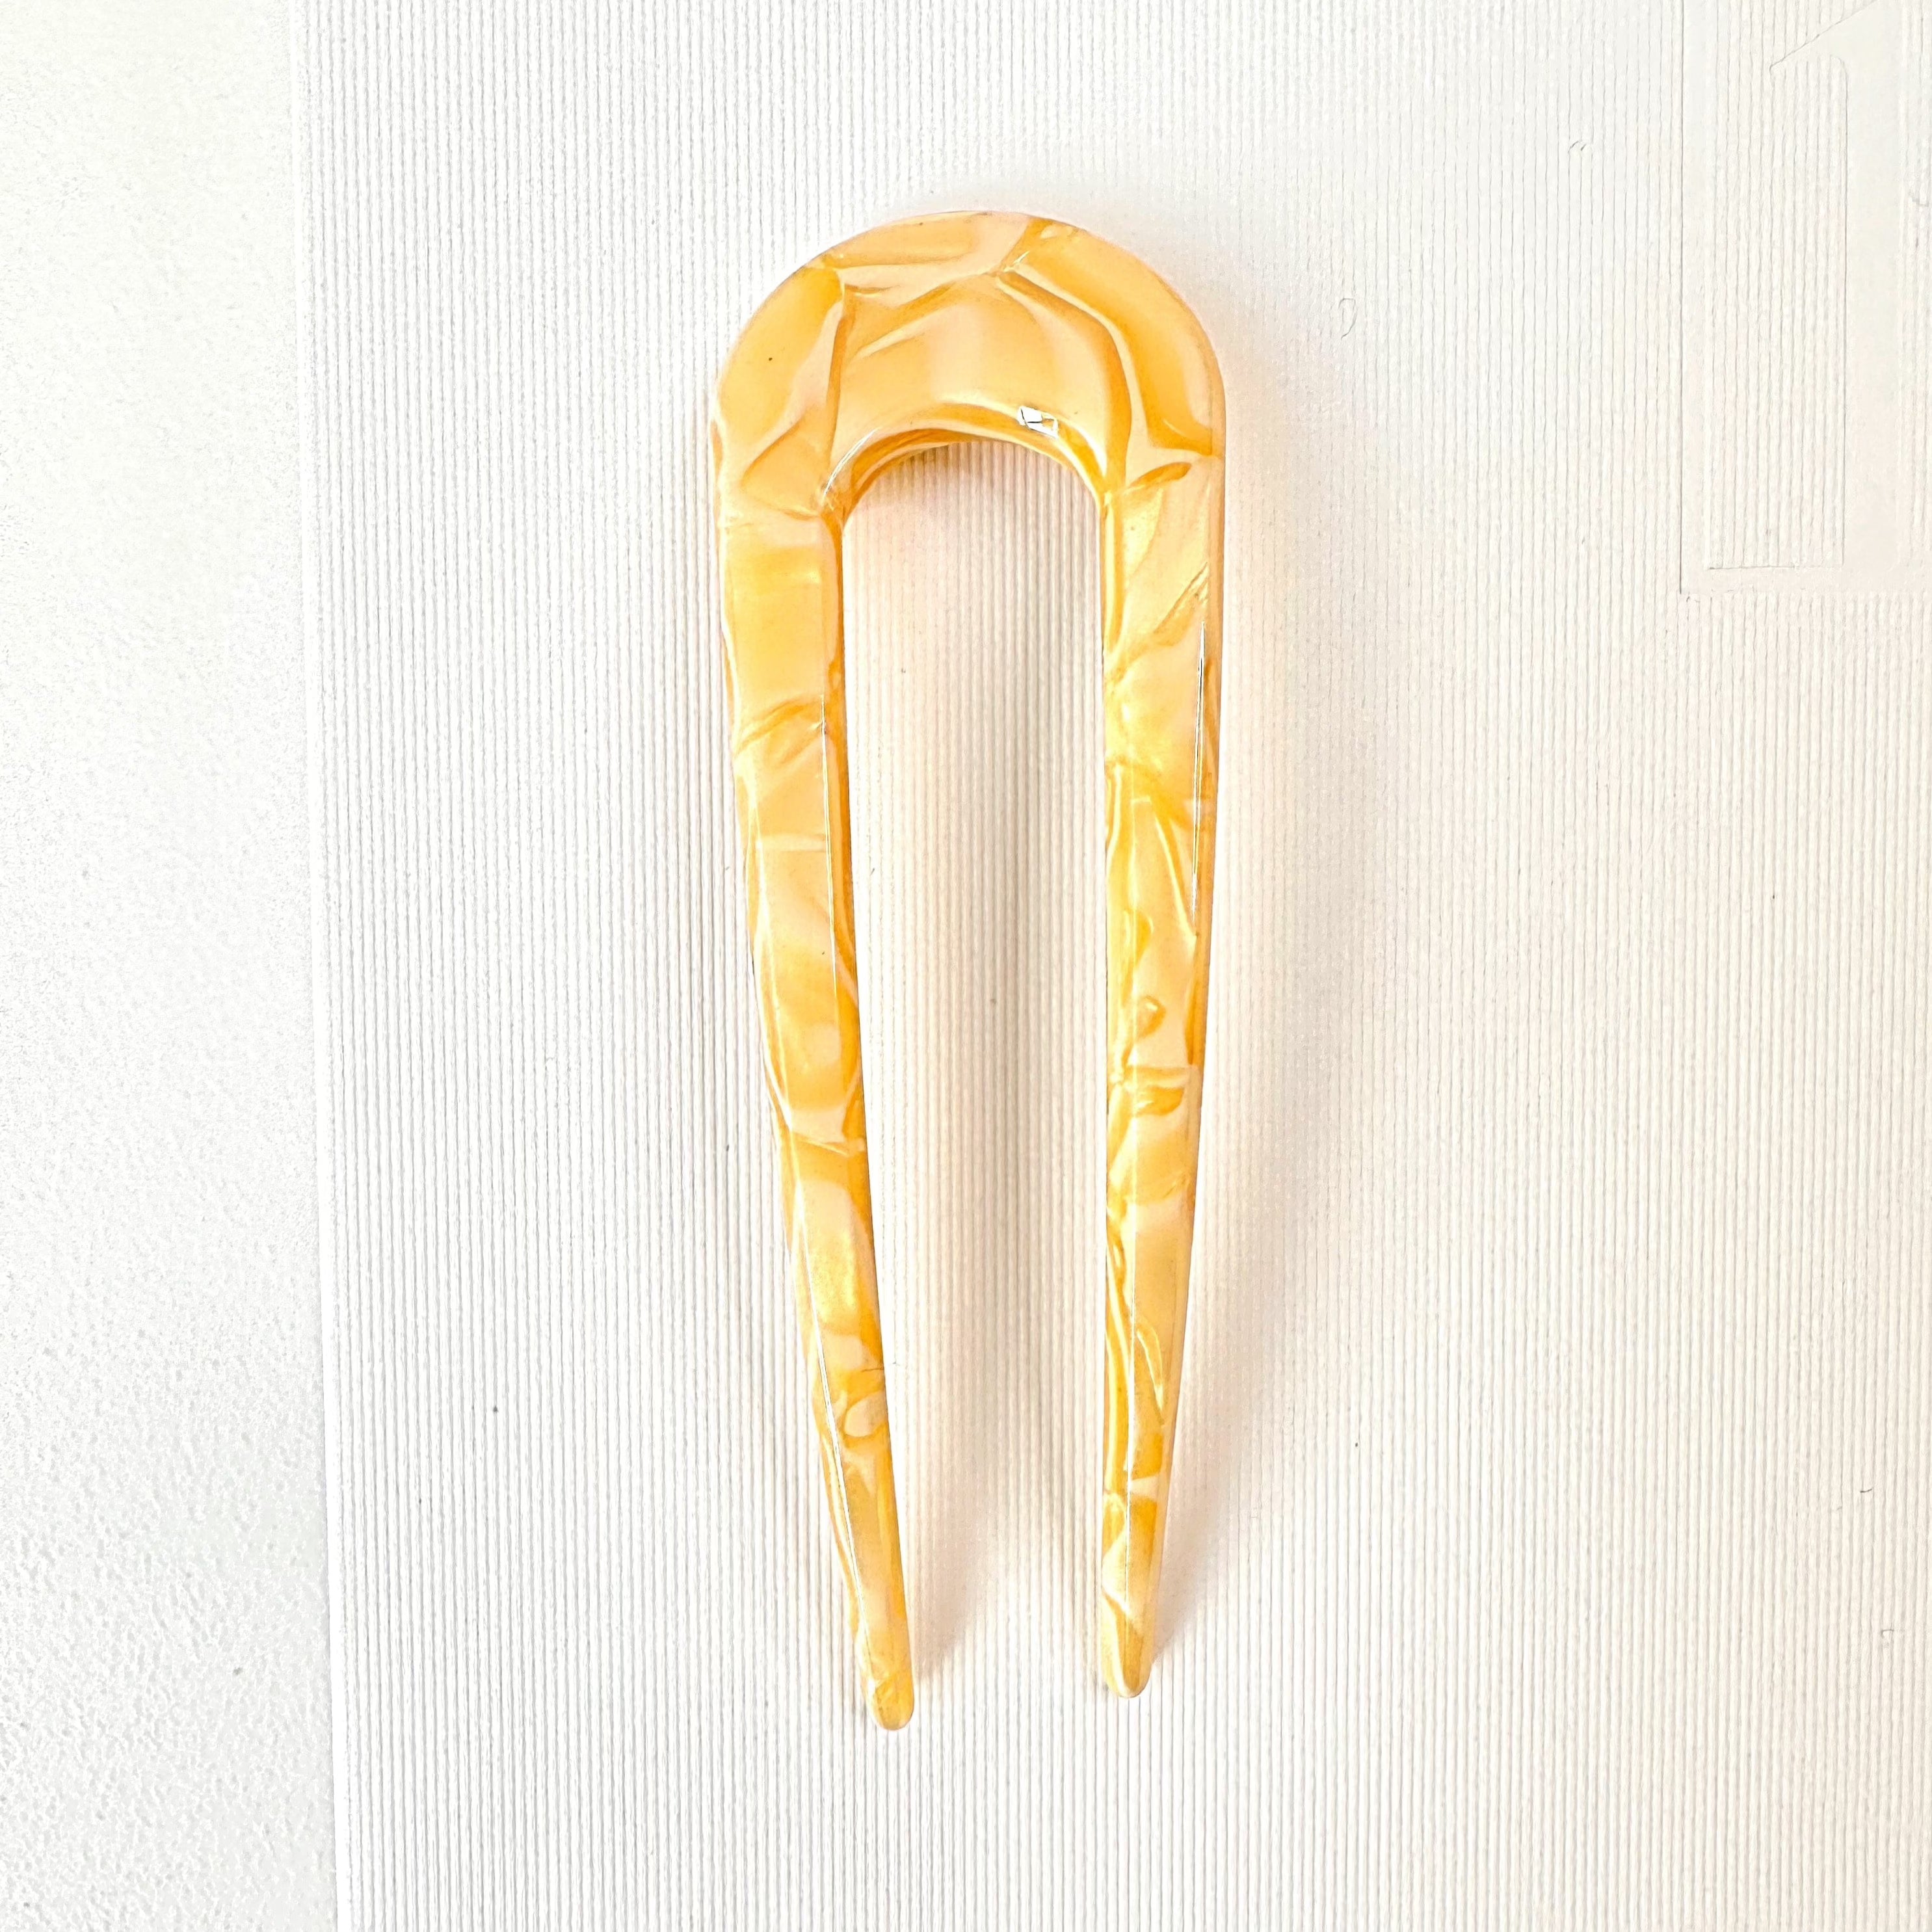 Acetate French Chignon Hair Pin Blonde by Solar Eclipse